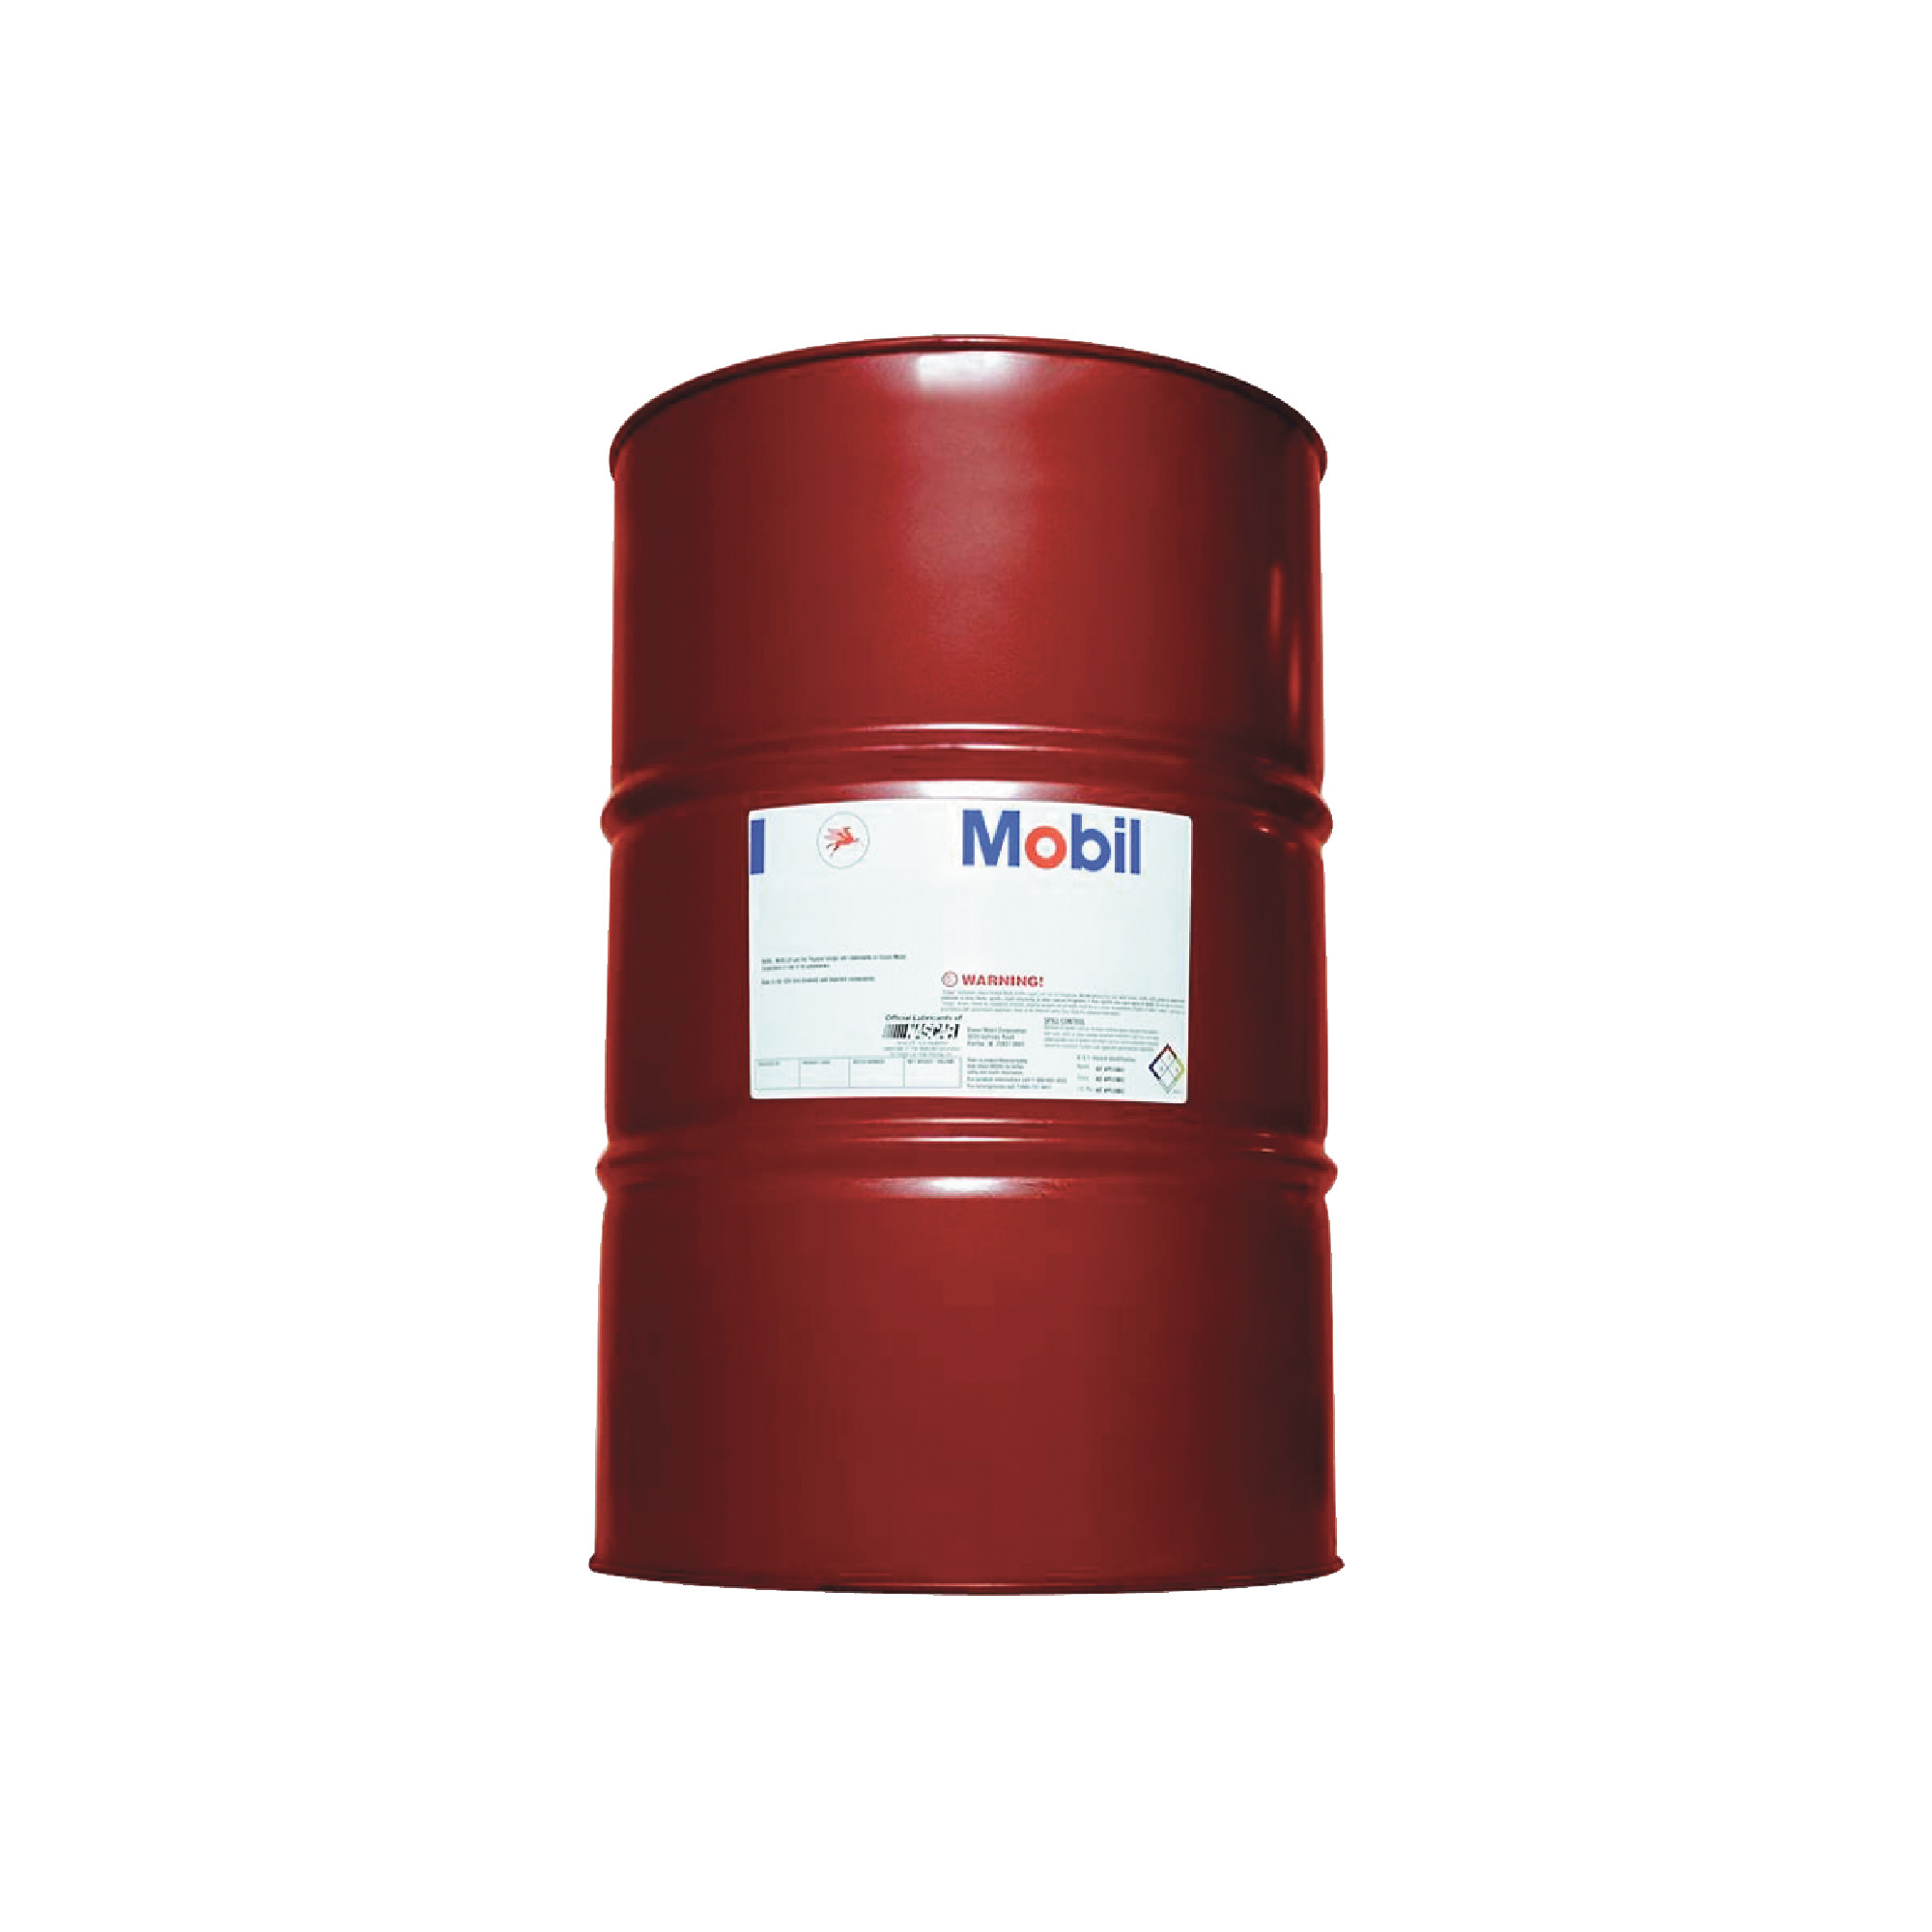 MOBIL VELOCITE #3 55 Gallon Drum High Speed Spindle and Hydraulic Oils